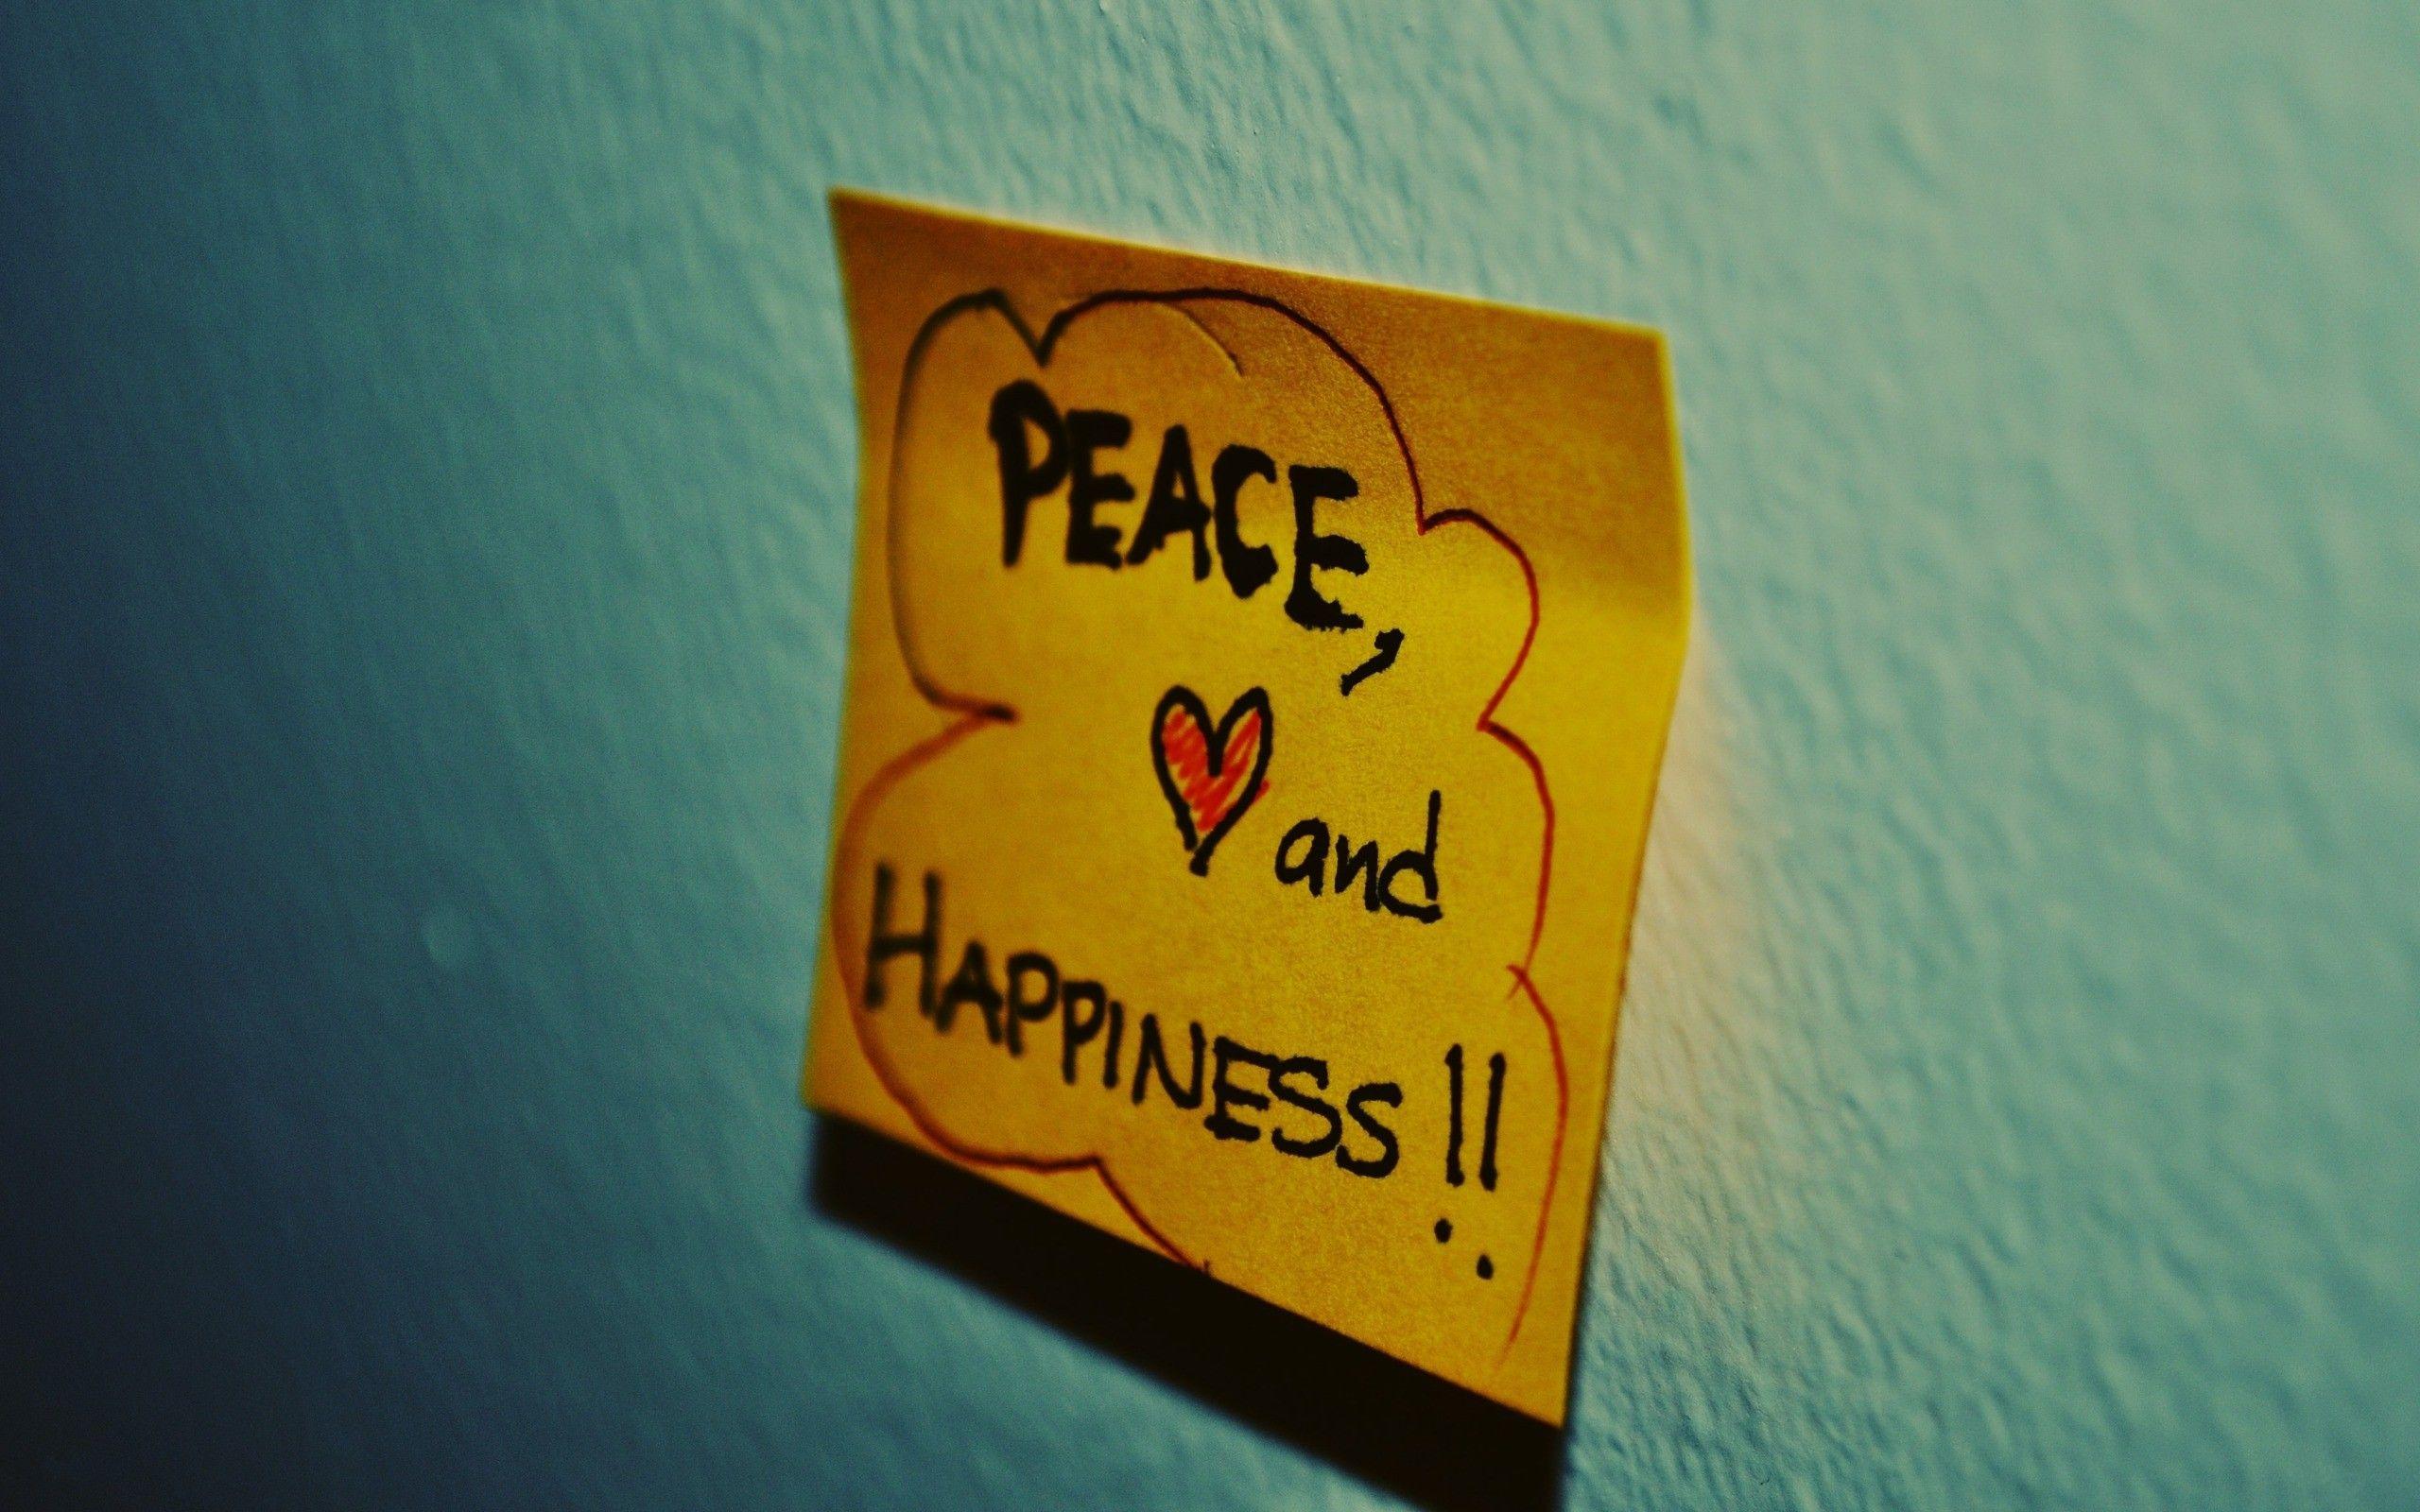 Download the Peace Sticky Note Wallpaper, Peace Sticky Note iPhone